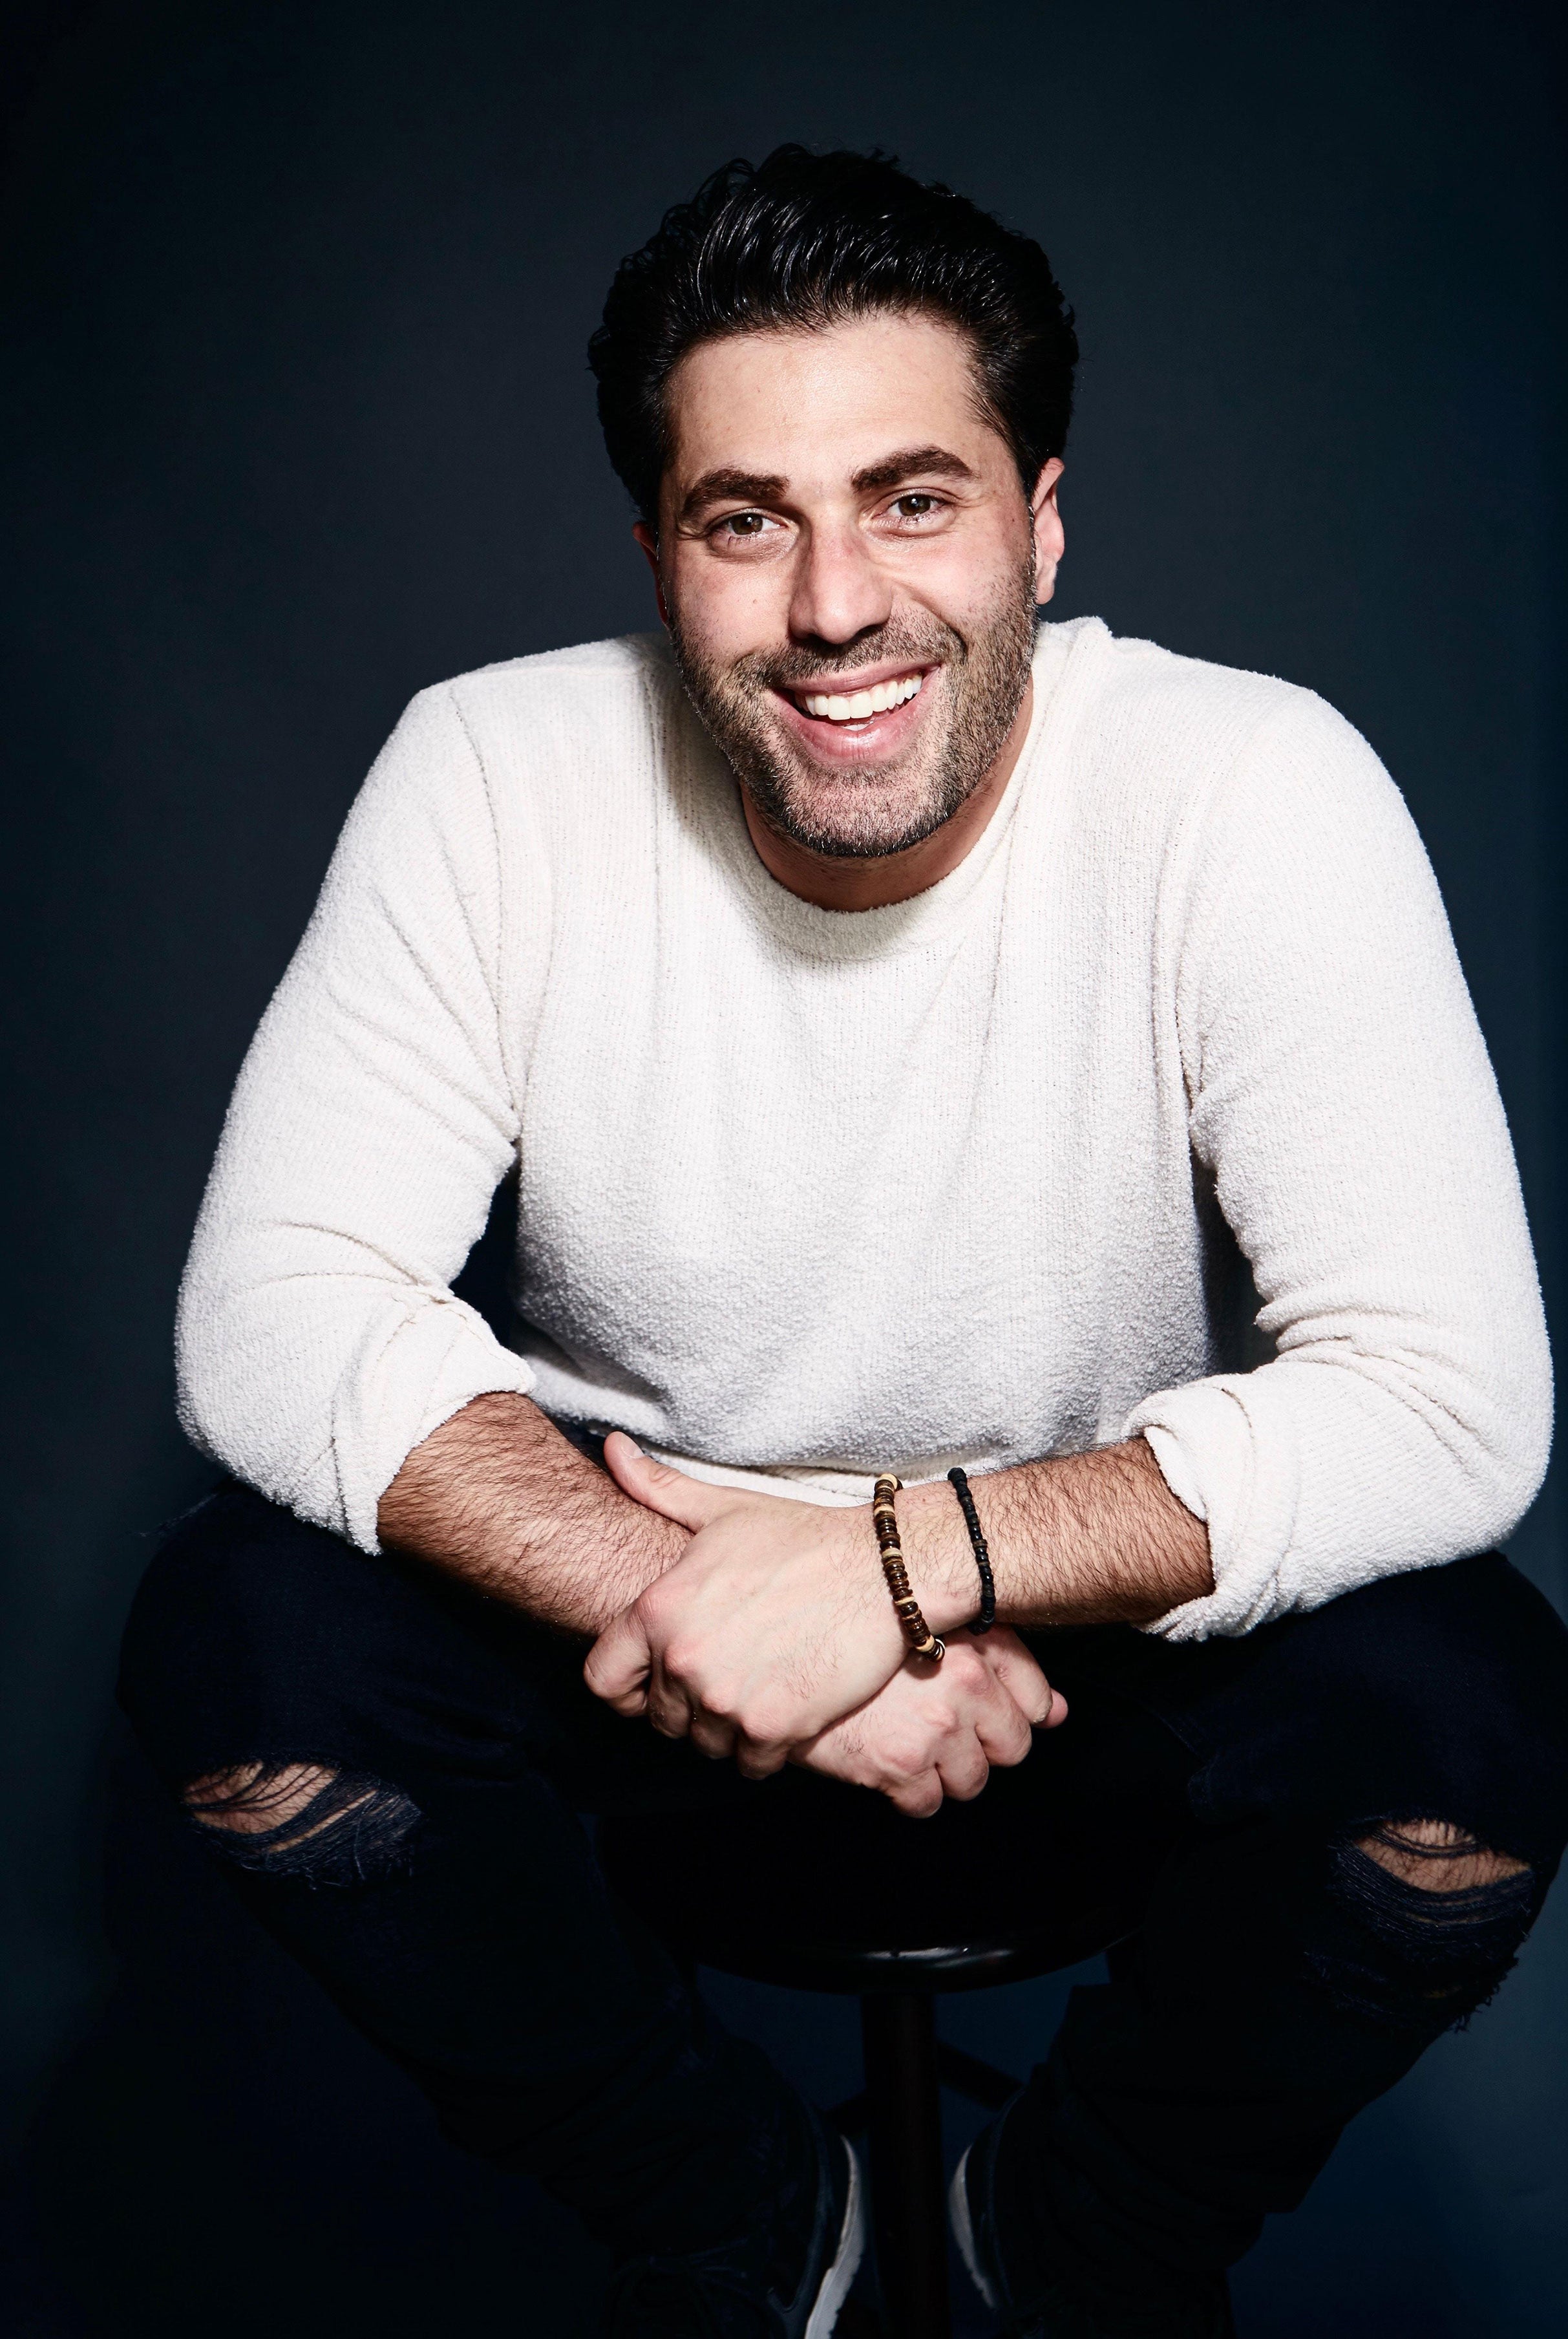 Adam Ray pre-sale code for your tickets in New York